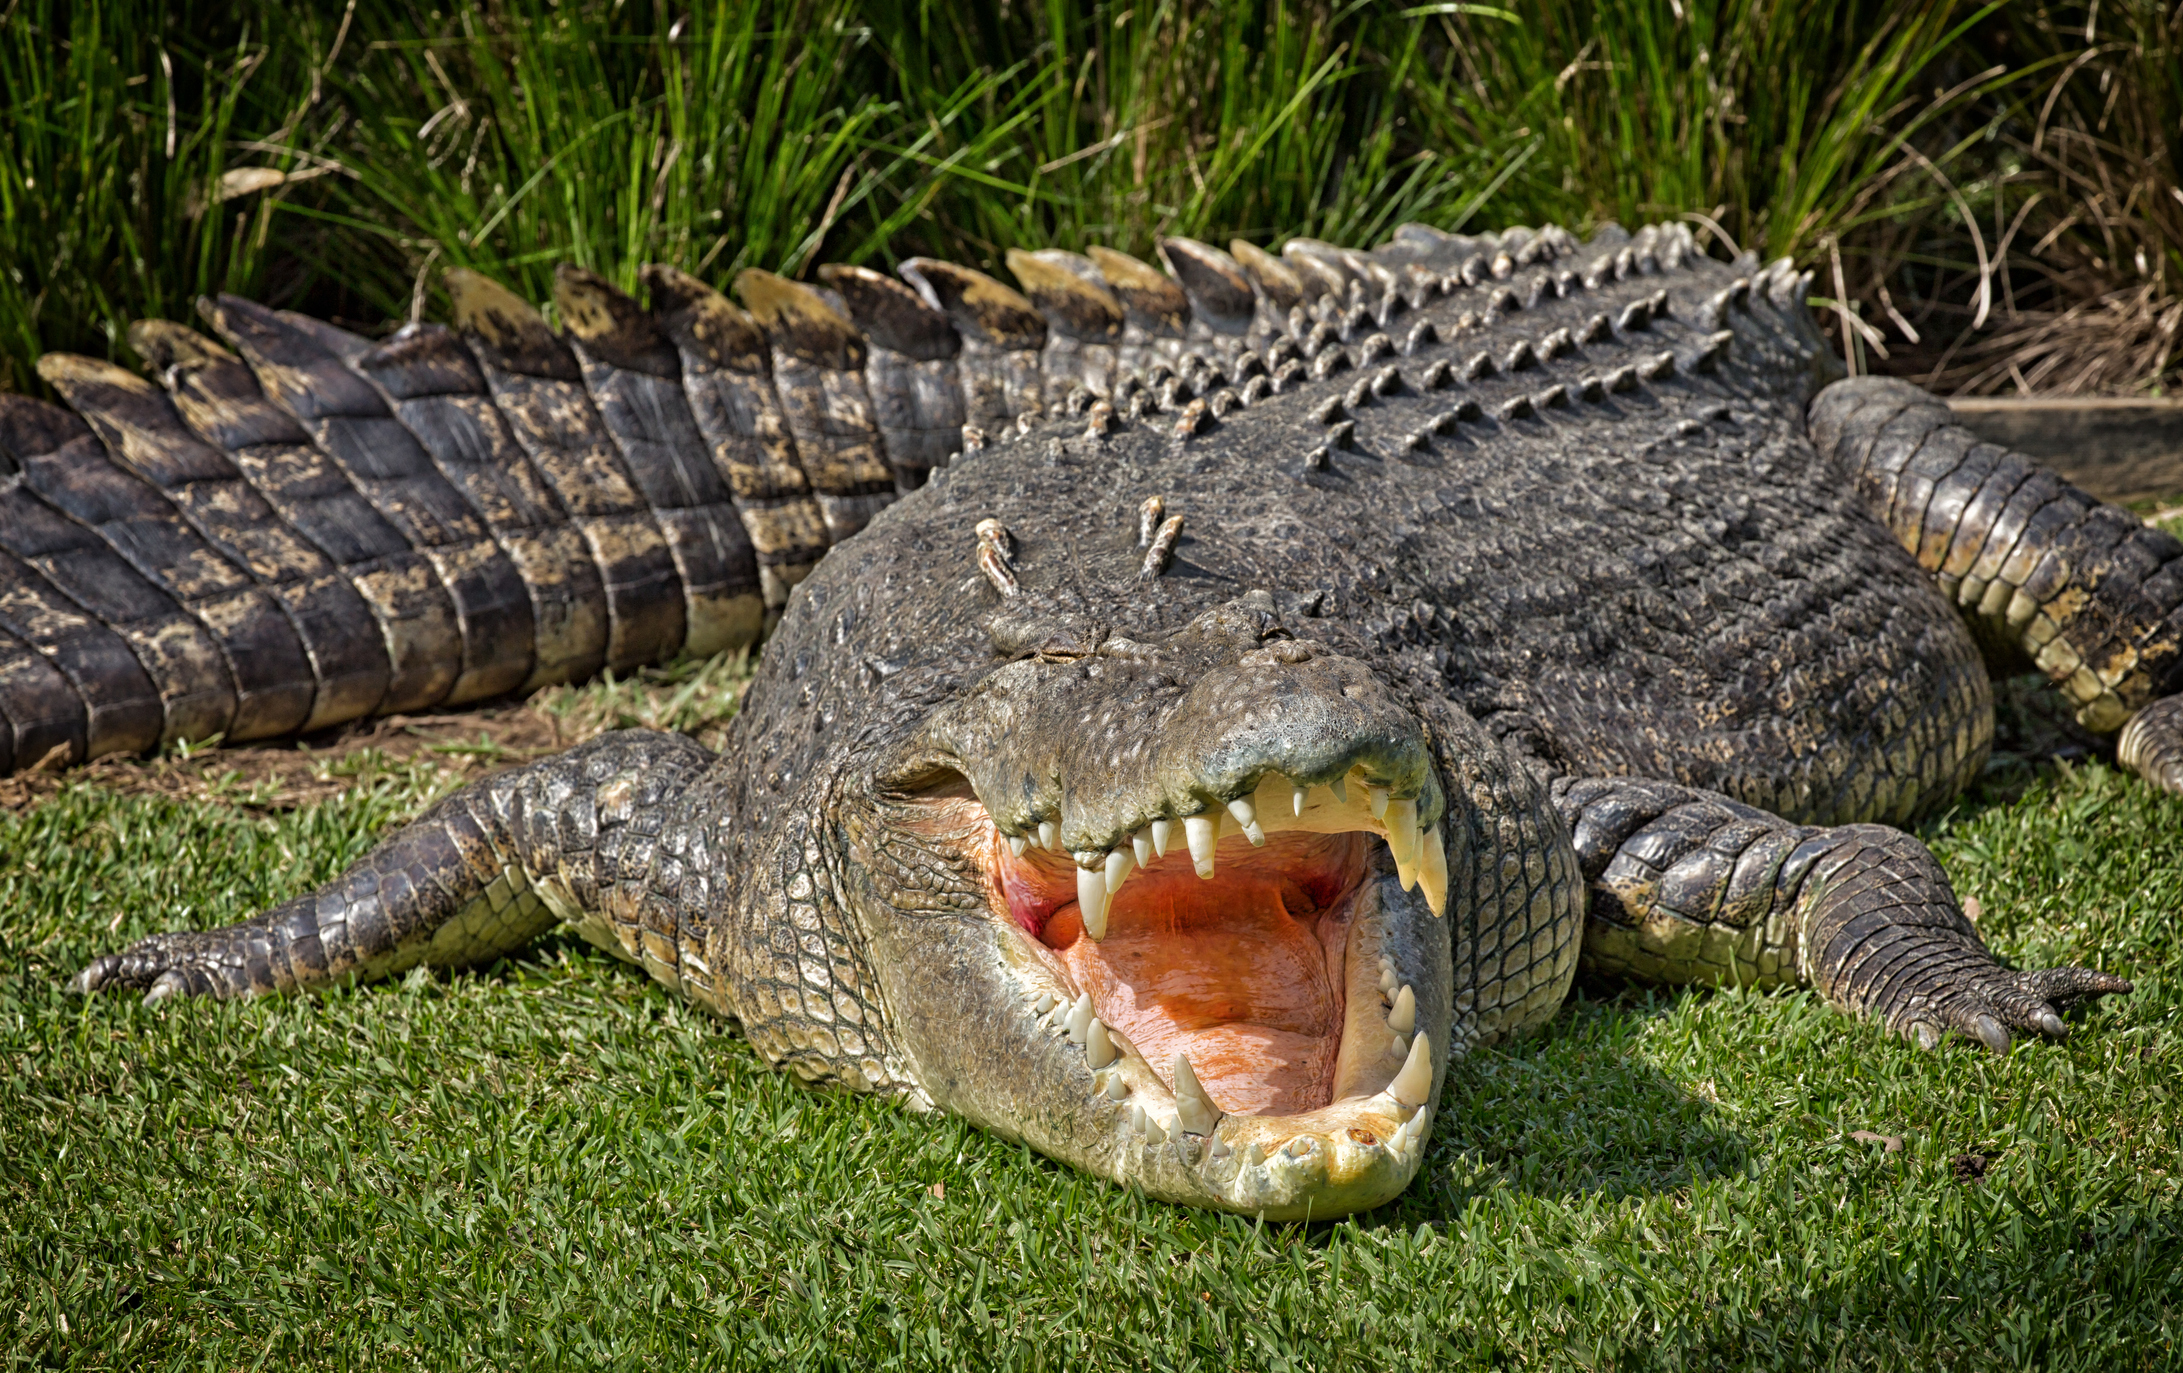 Crocodile Autopsy Reveals Surgical Plate in Stomach That ...